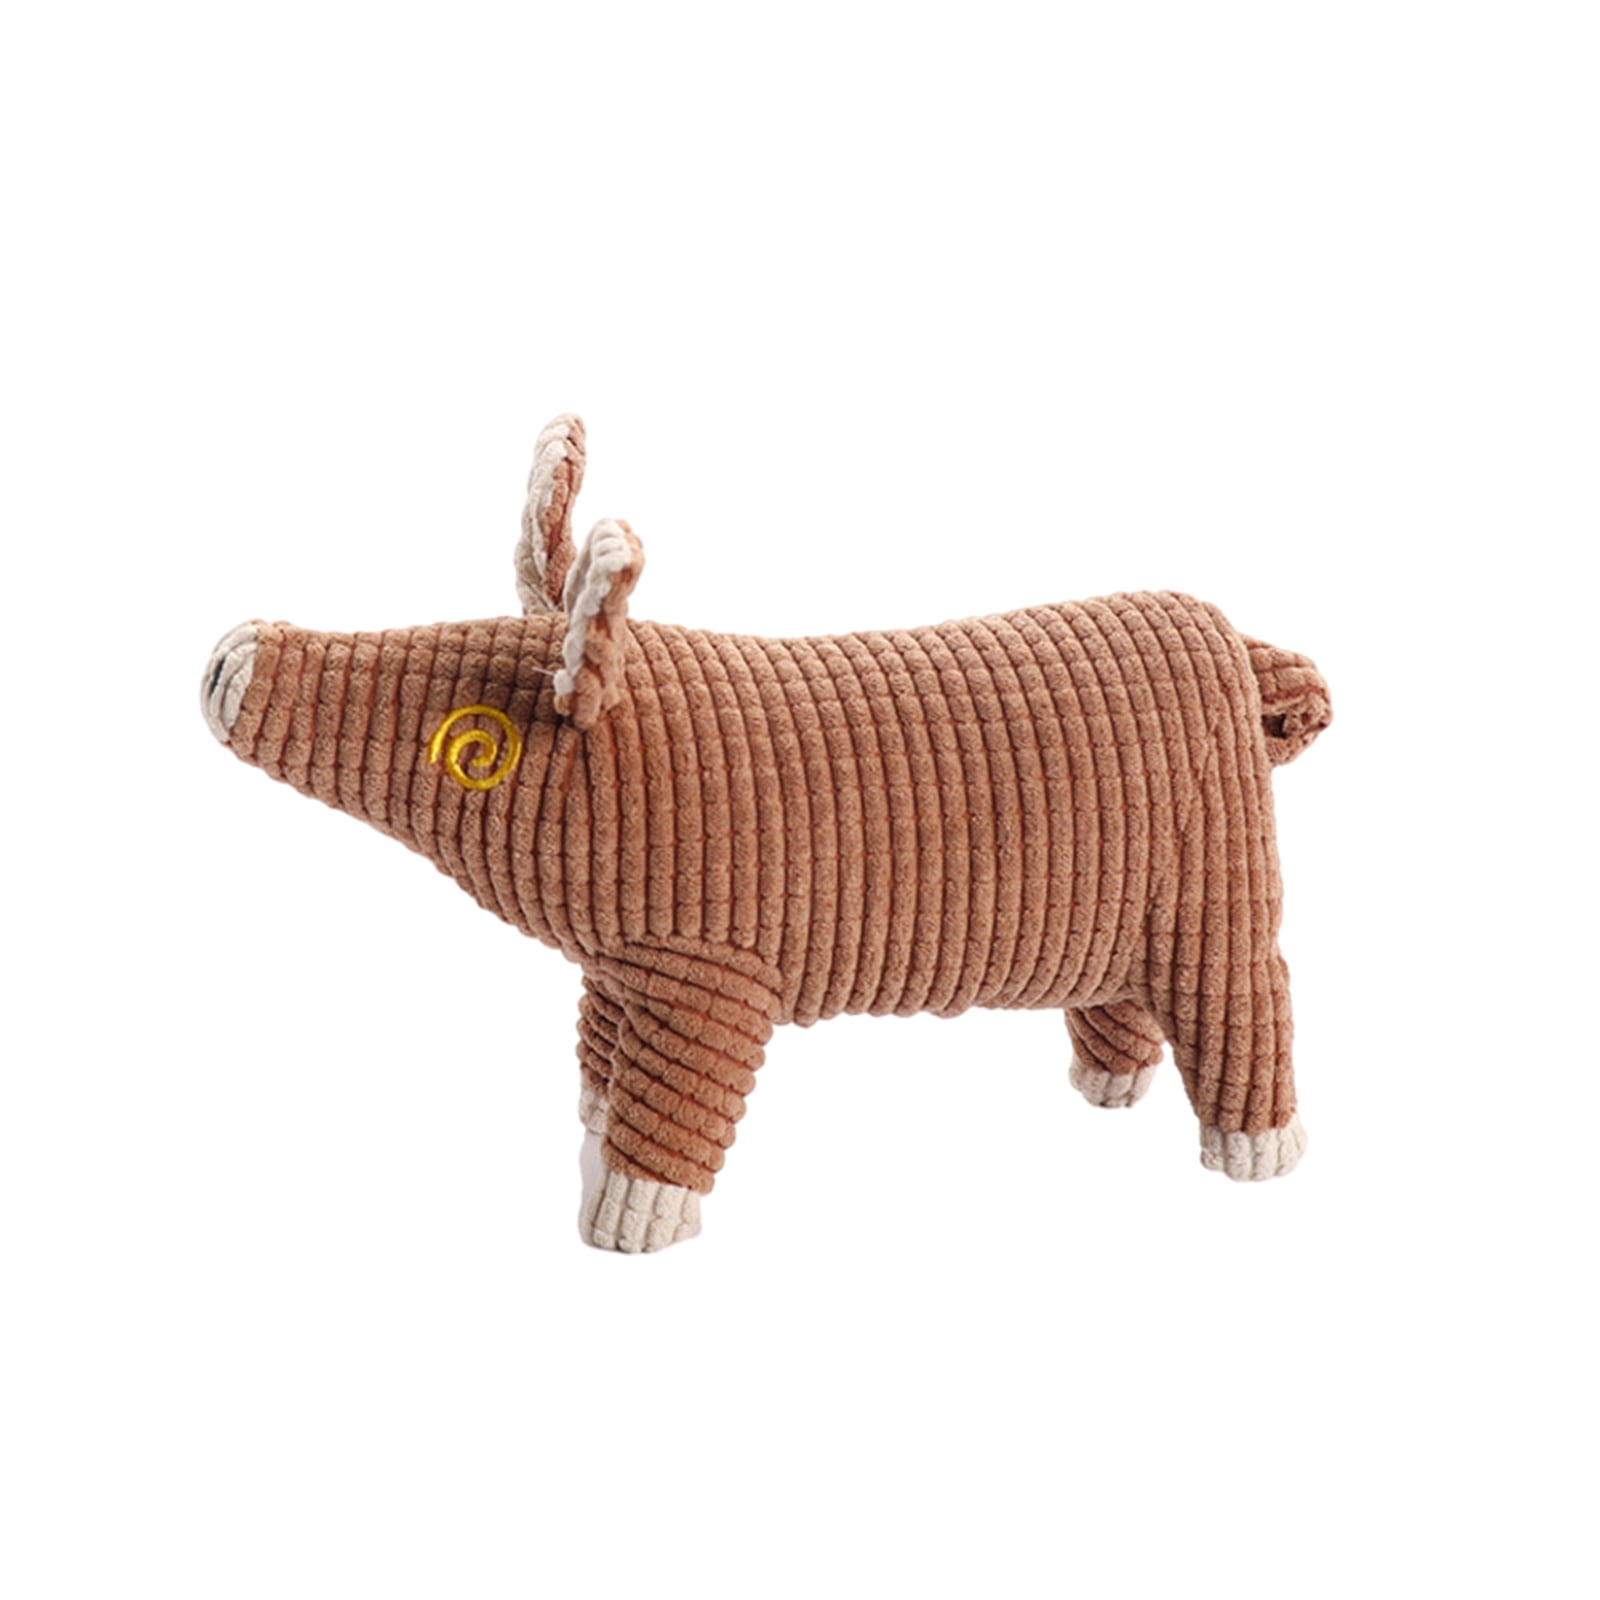 Squeaky Dog Chew Toy Realistic Roasted Suckling Pig Toy Lovely Pet Biting Toy Toxic Bite-Resistant Pet Toy Pet Interactive Sounding Toys